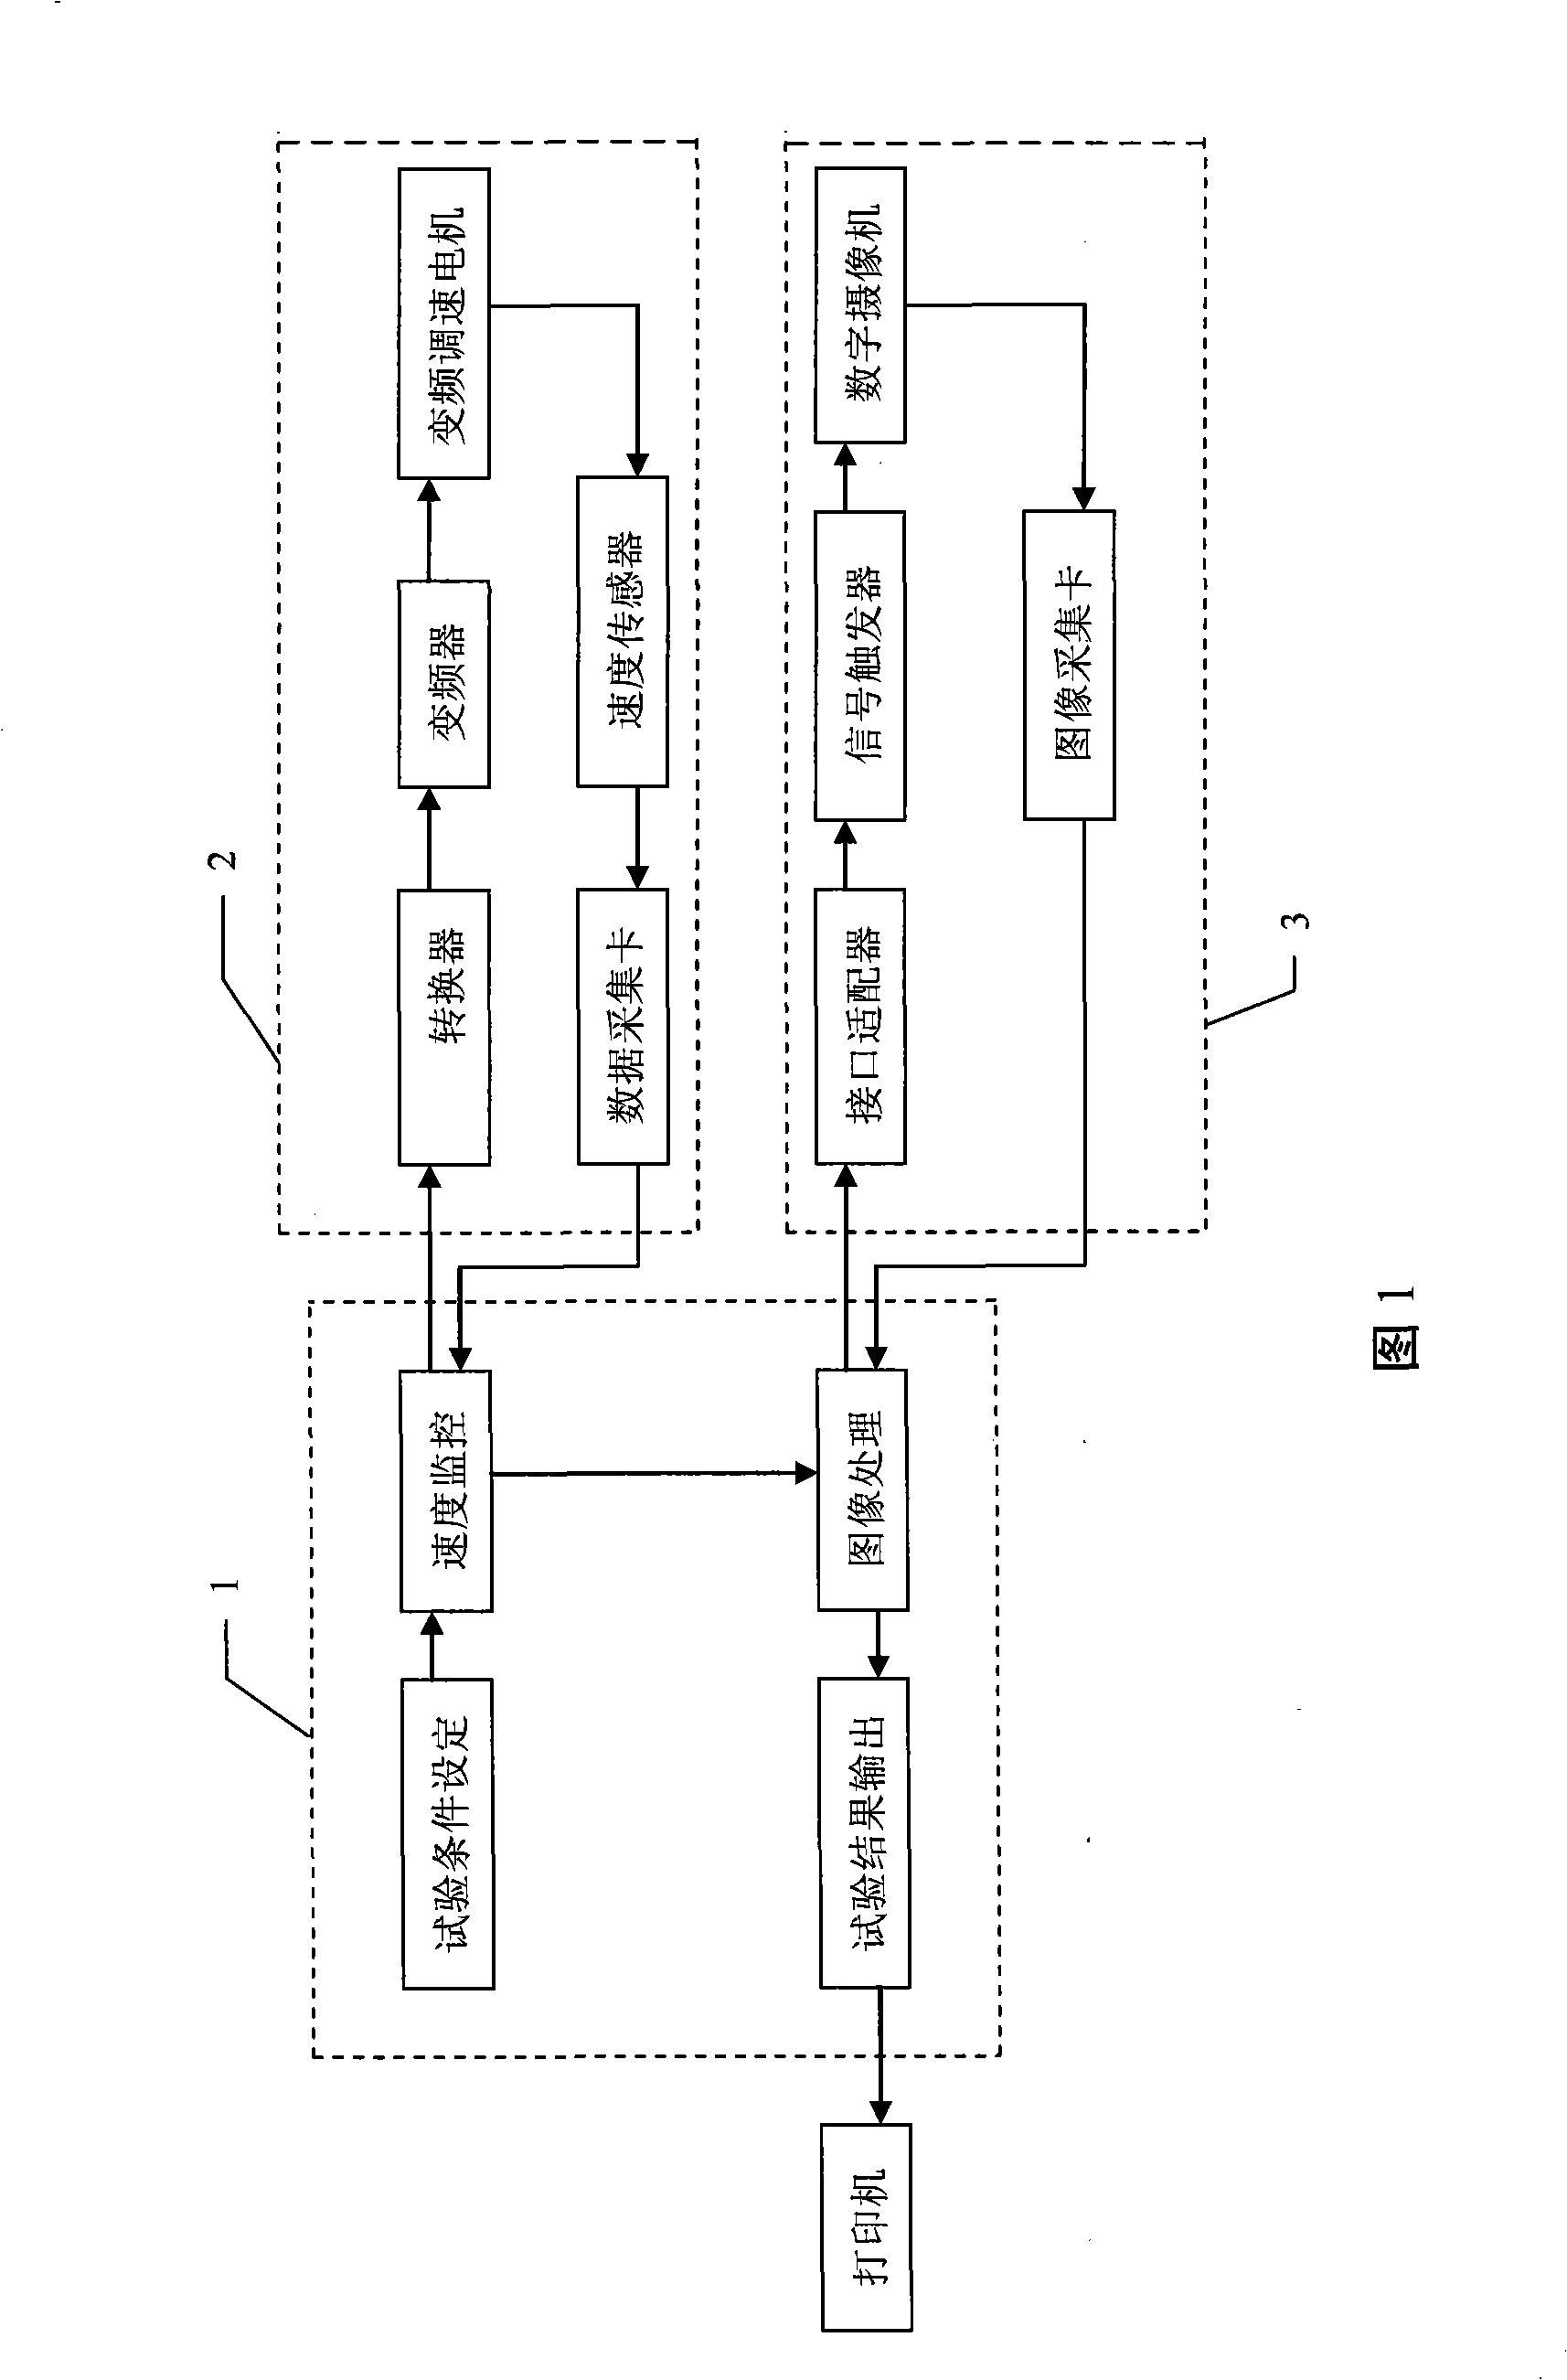 System for detecting seed sowing device performance